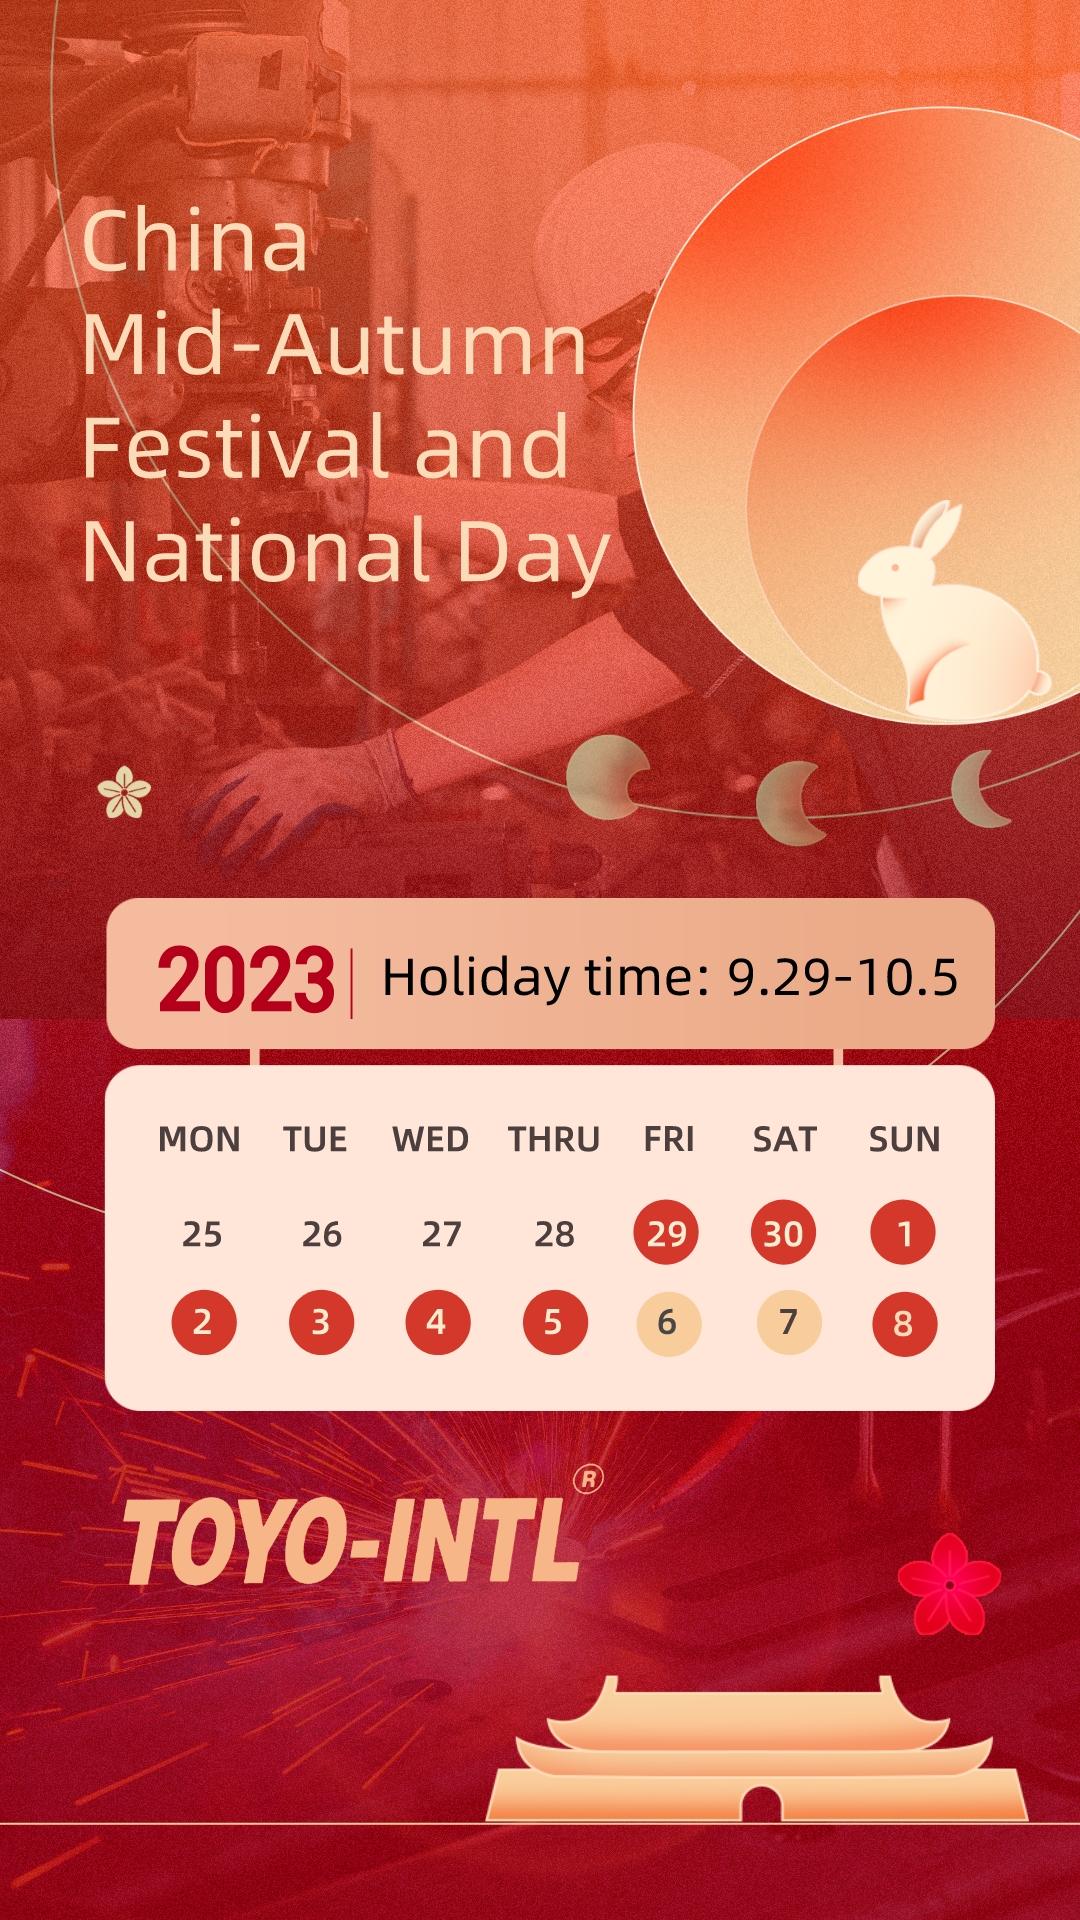 China Mid-Autumn Festival and National Day